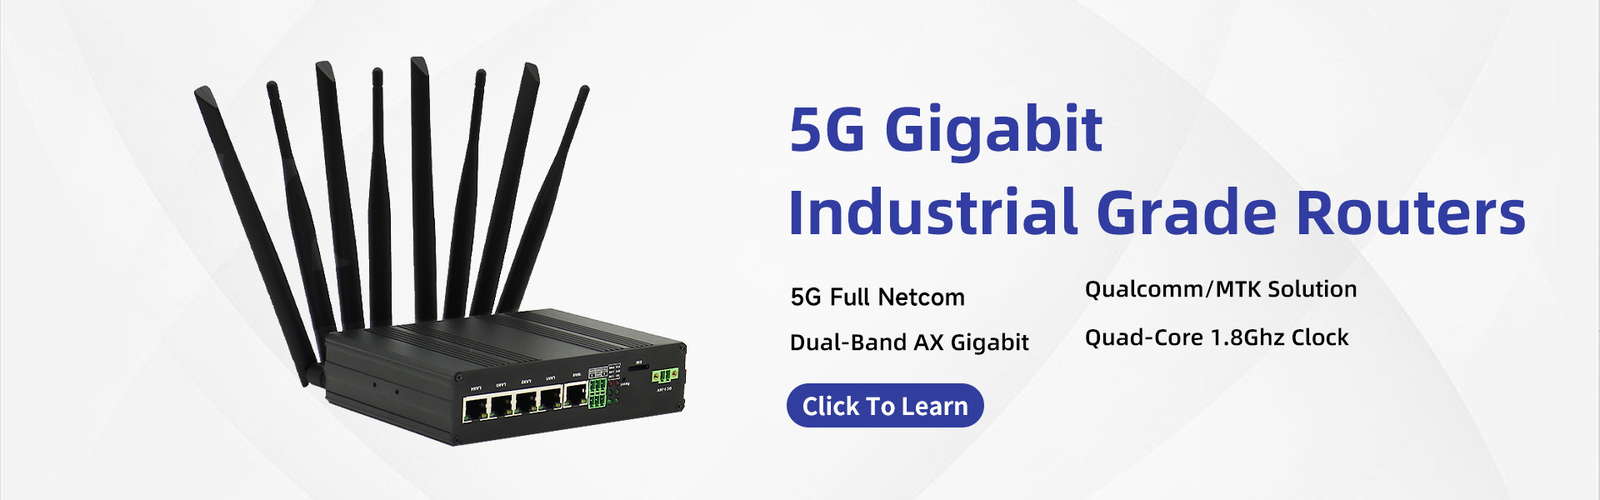 router industriale 5G